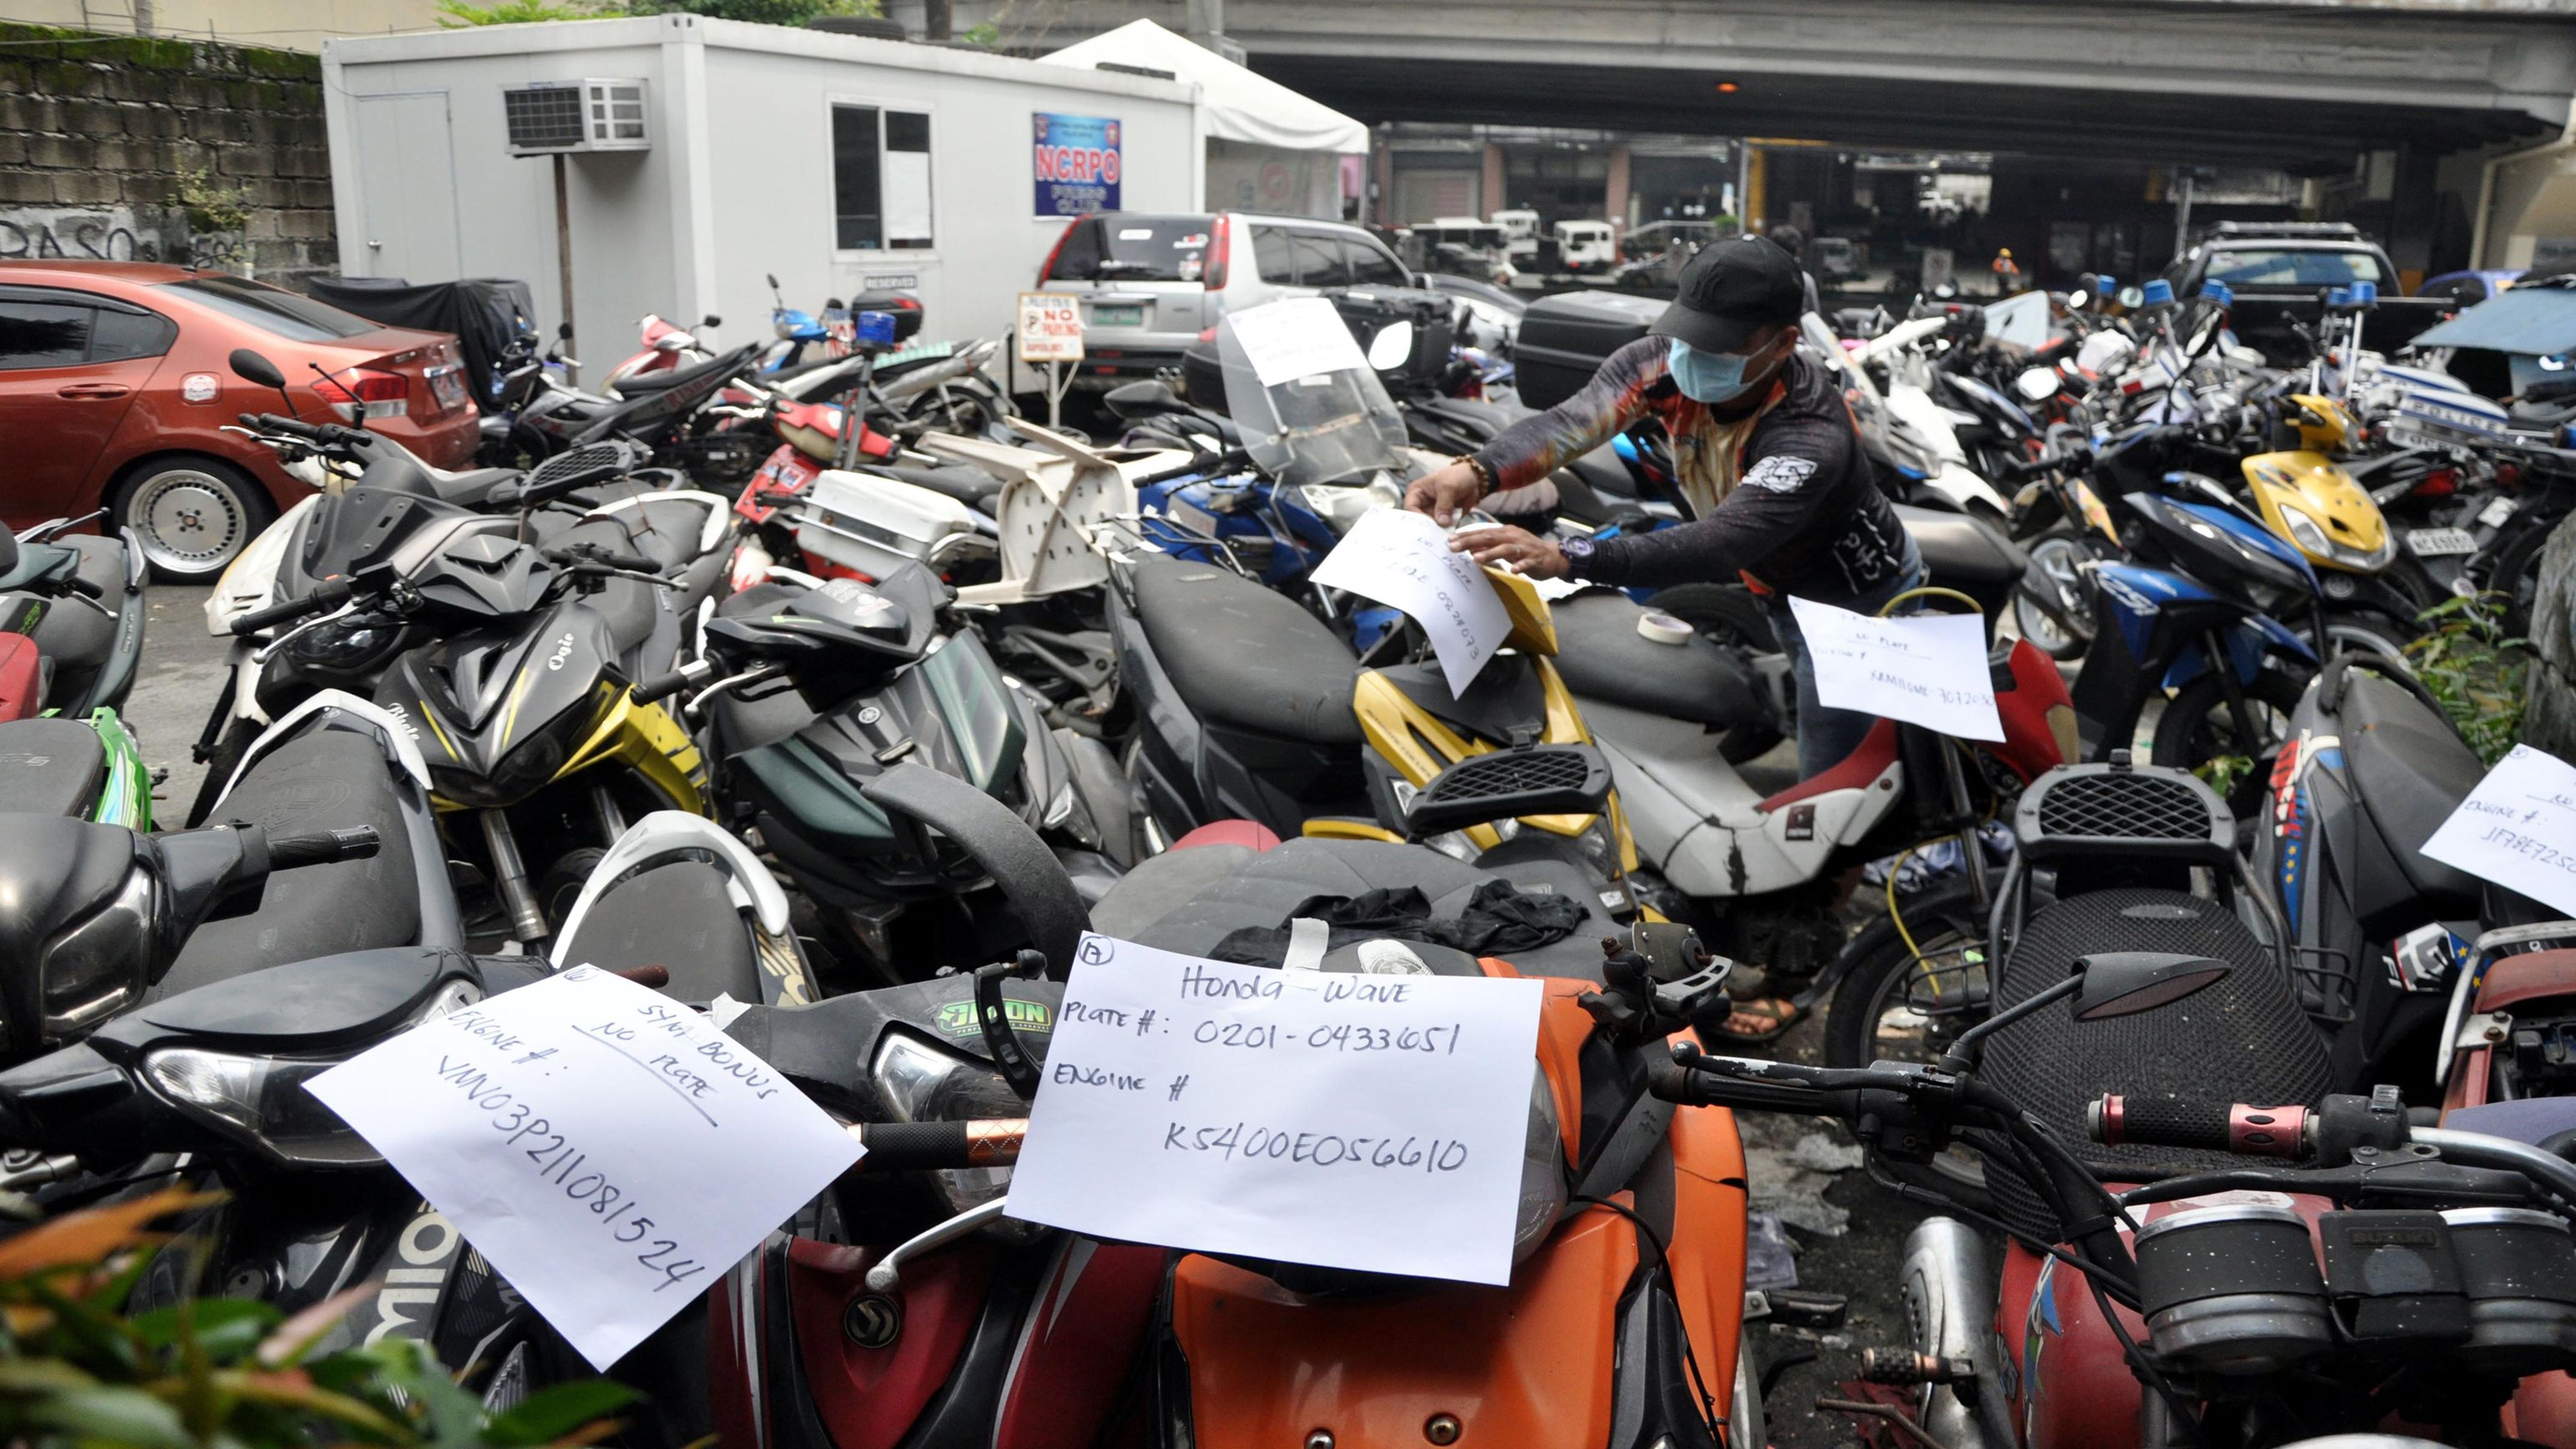 MOTORCYCLES USED BY CRIMINALS CROWD PARKING LOT photo by Danny Querubin